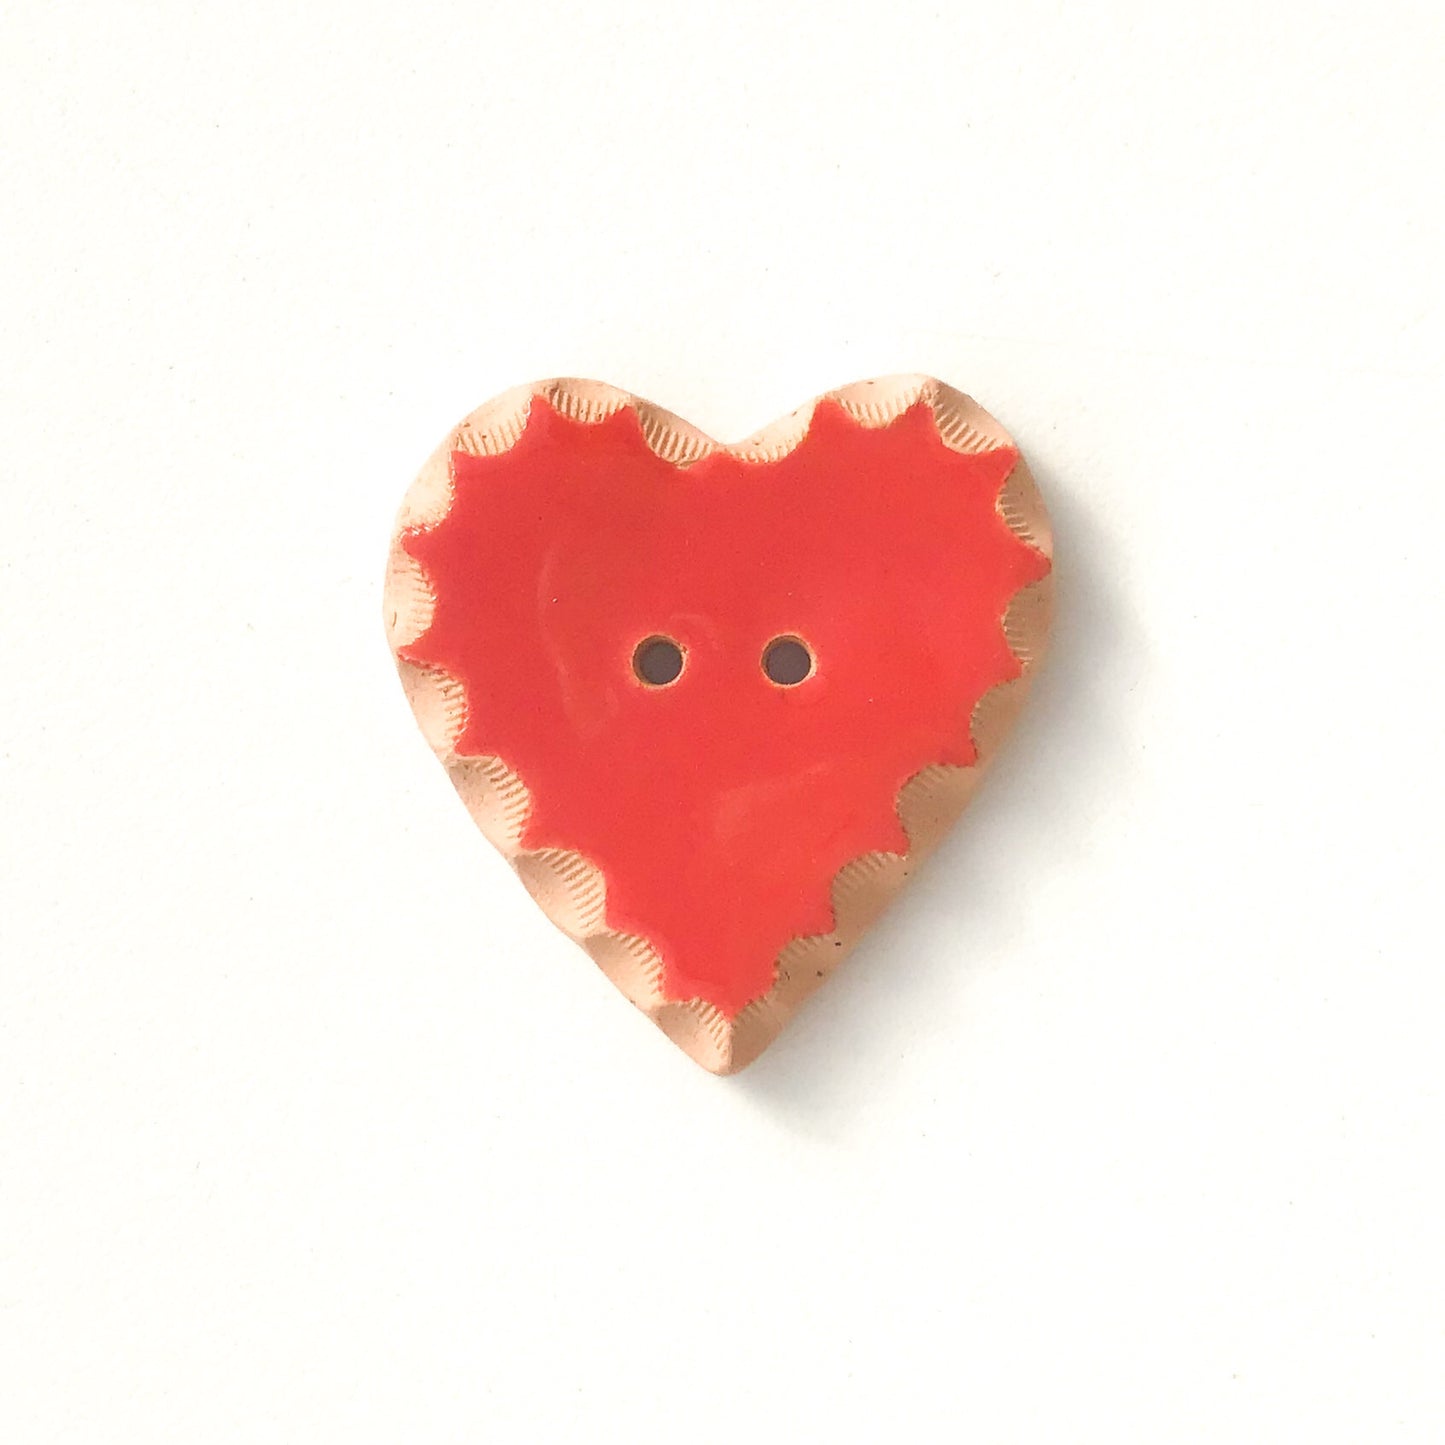 Decorative Red Heart Buttons - Ceramic Heart Button - 1 3/8"